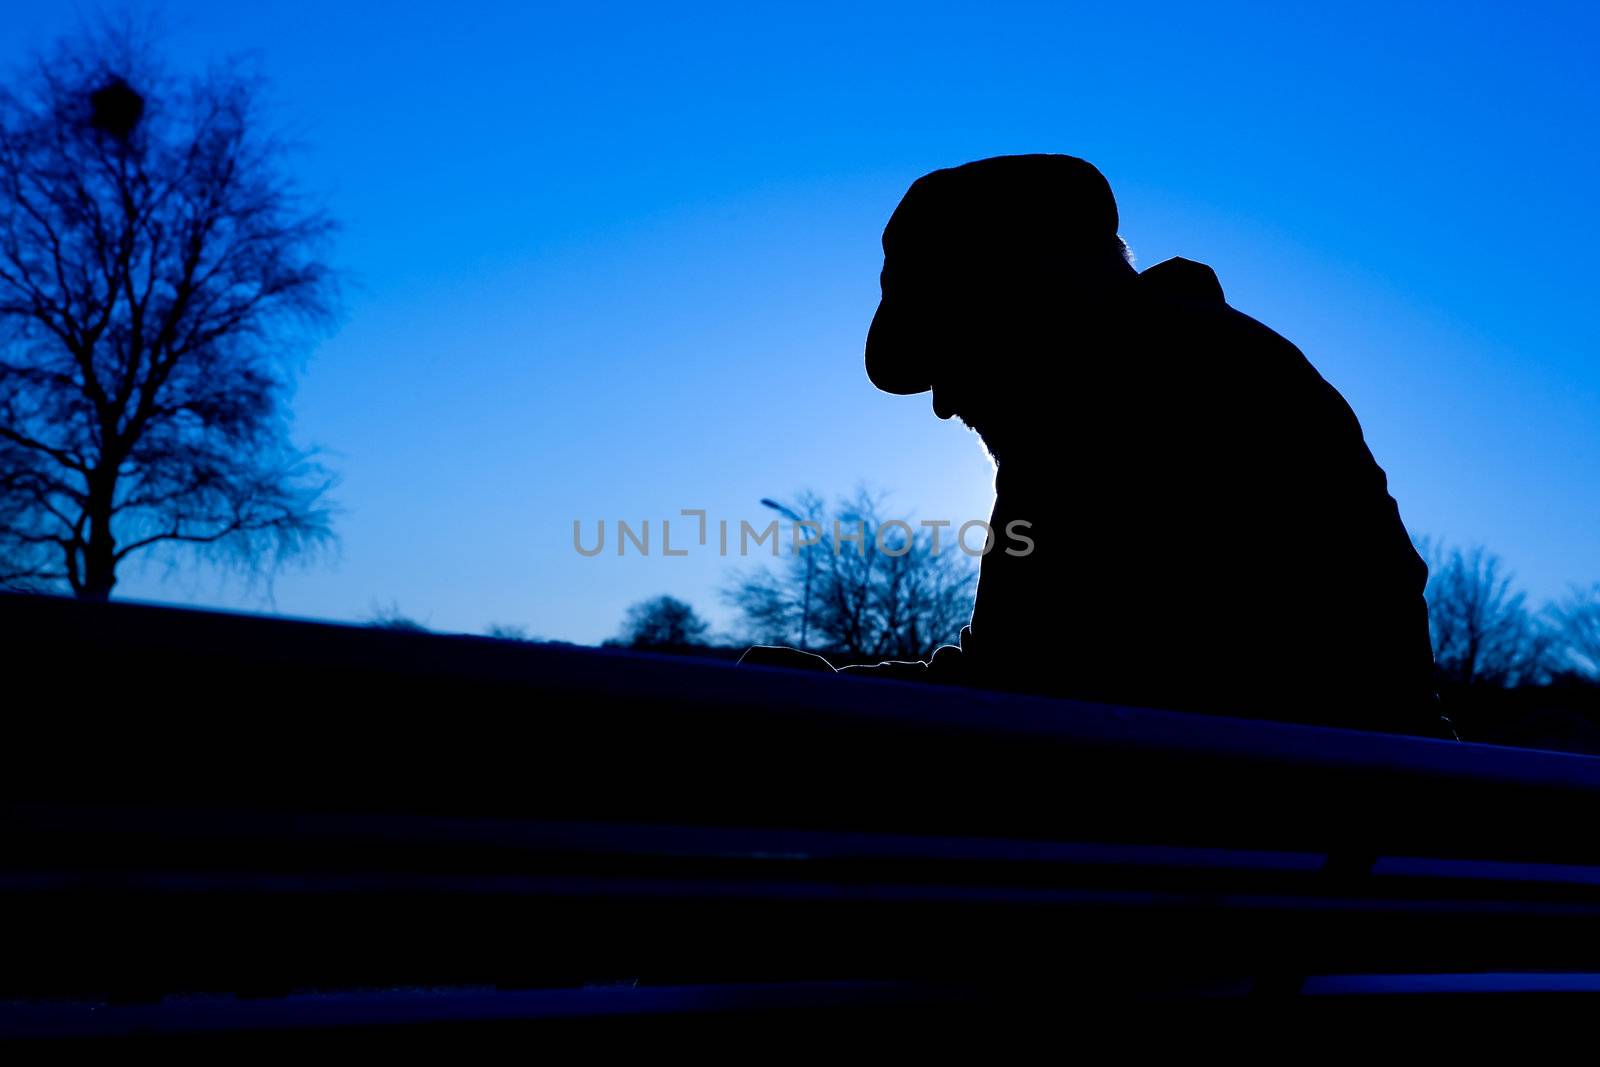 A depressed thoughtful sitting on a park bench in cold winter scene.